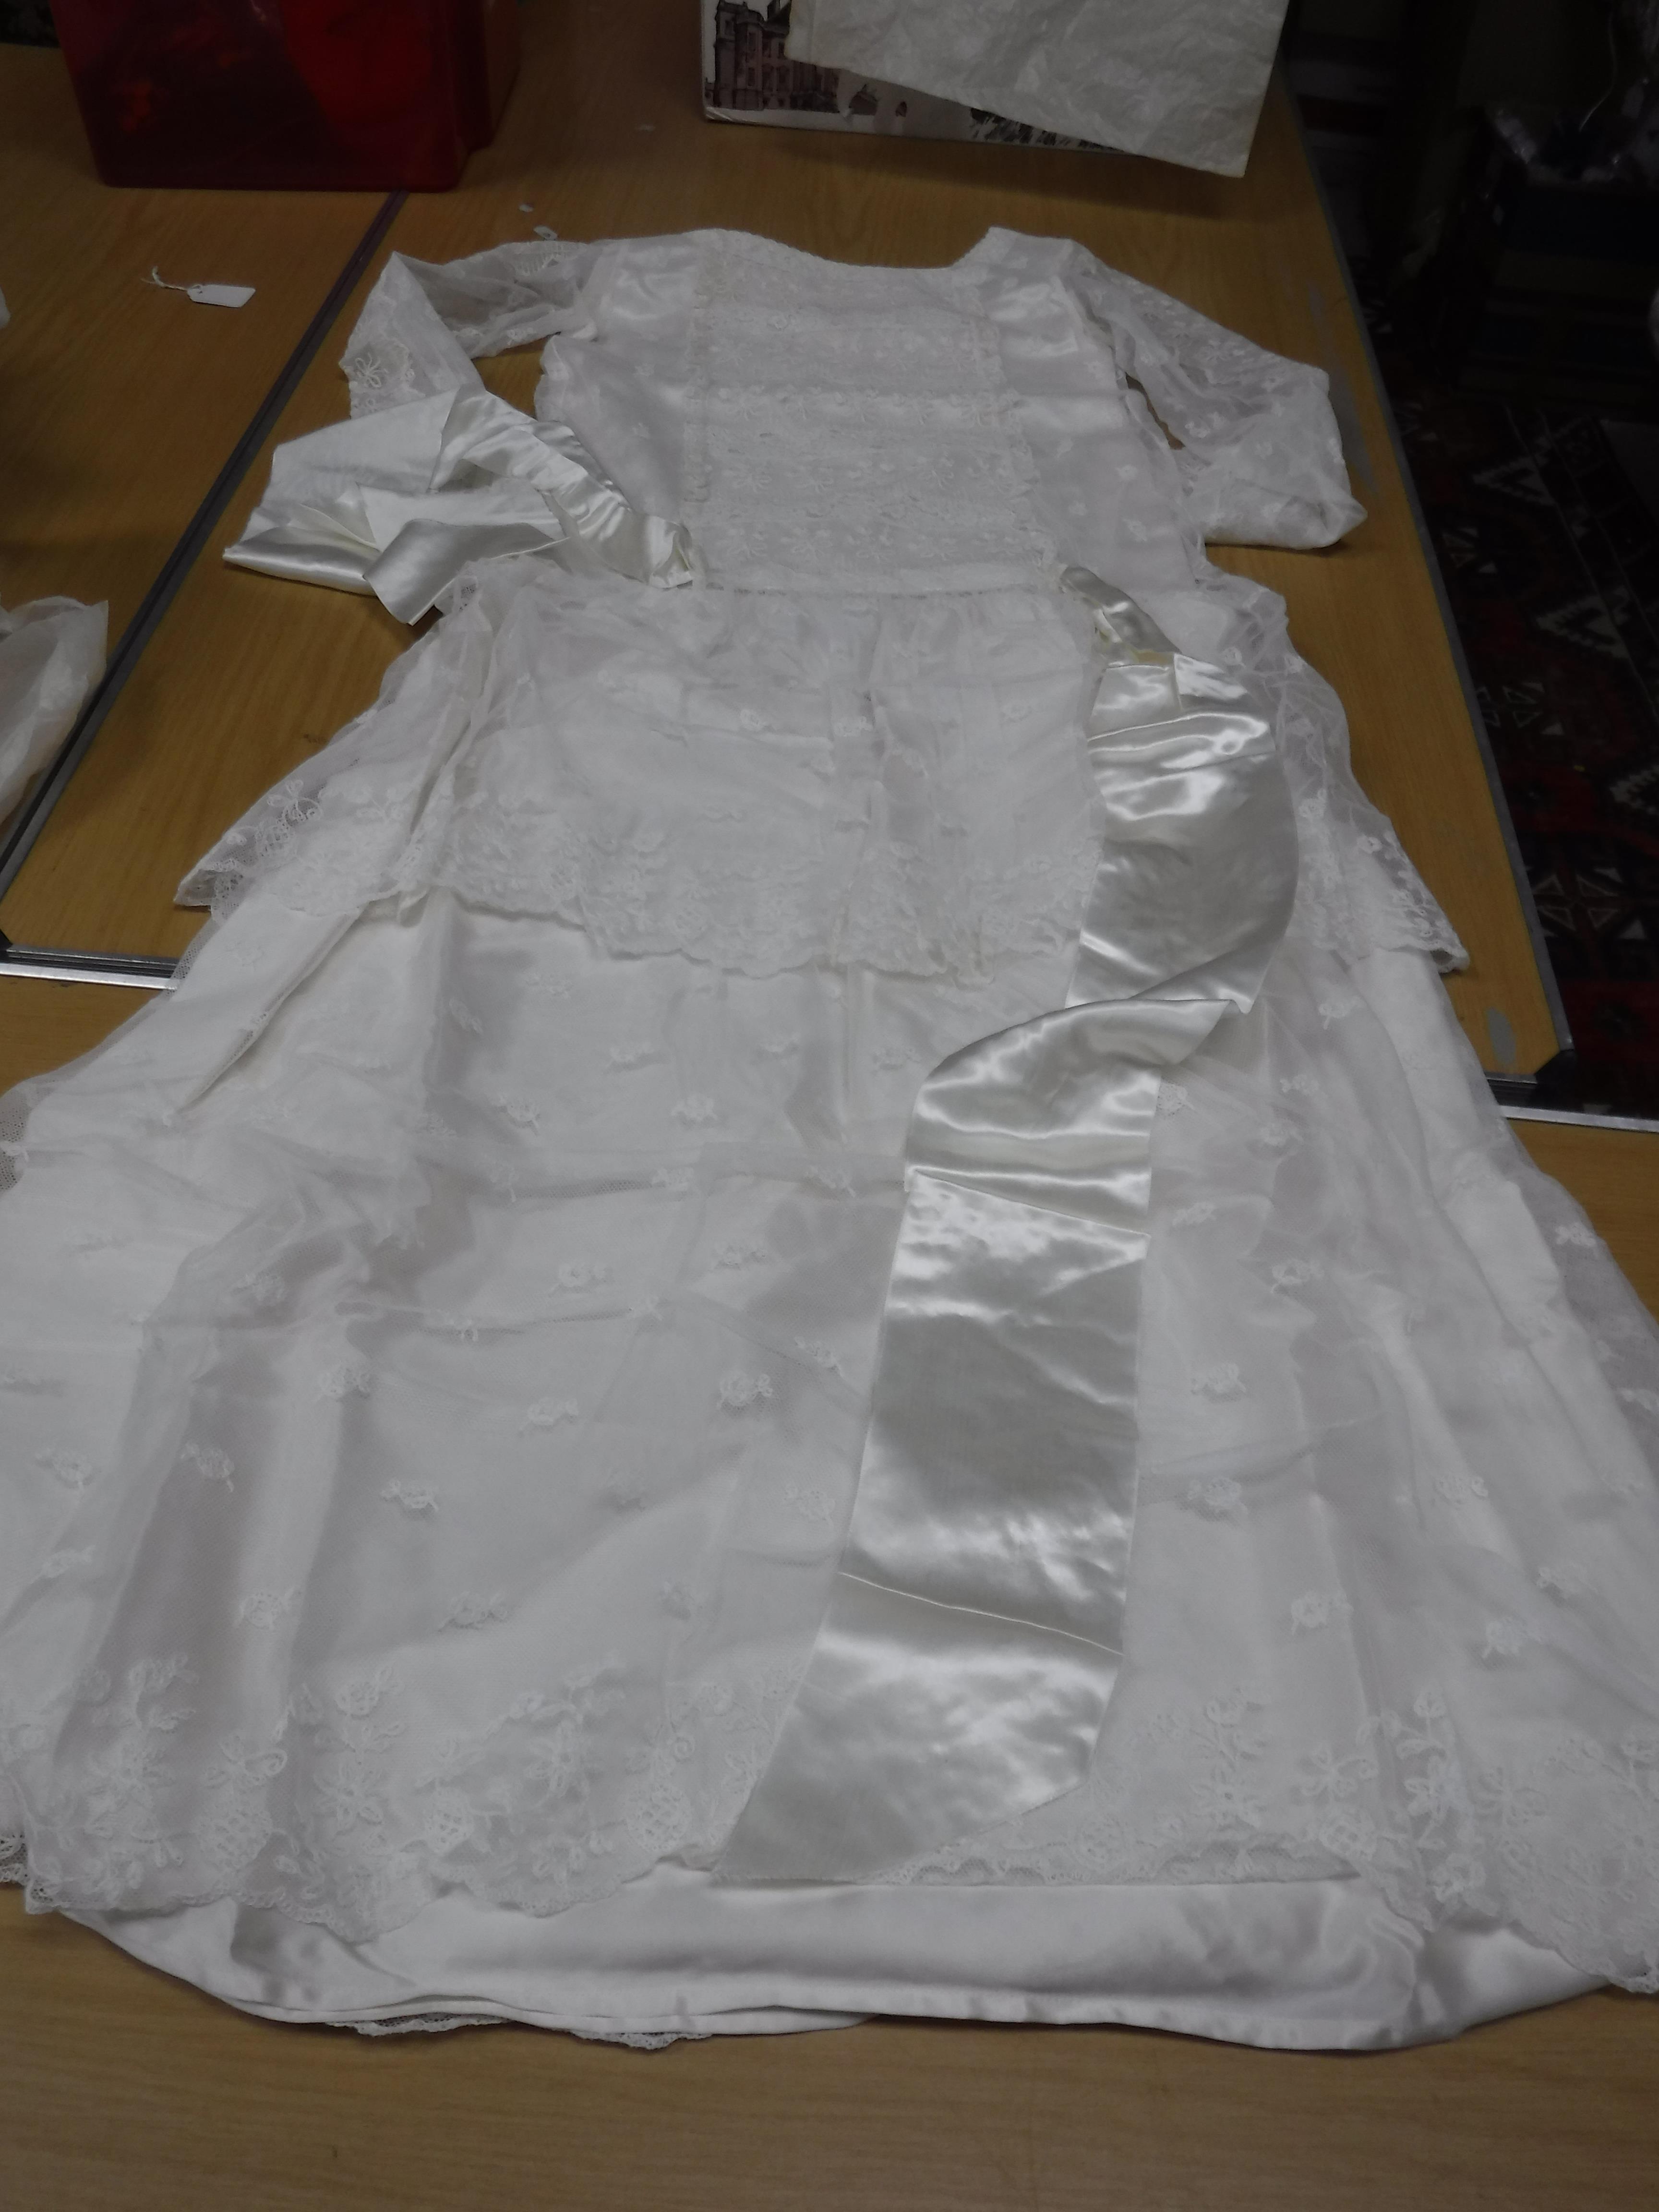 A Lyn Lundie lace work decorated wedding dress in the 1920s style, - Image 6 of 7